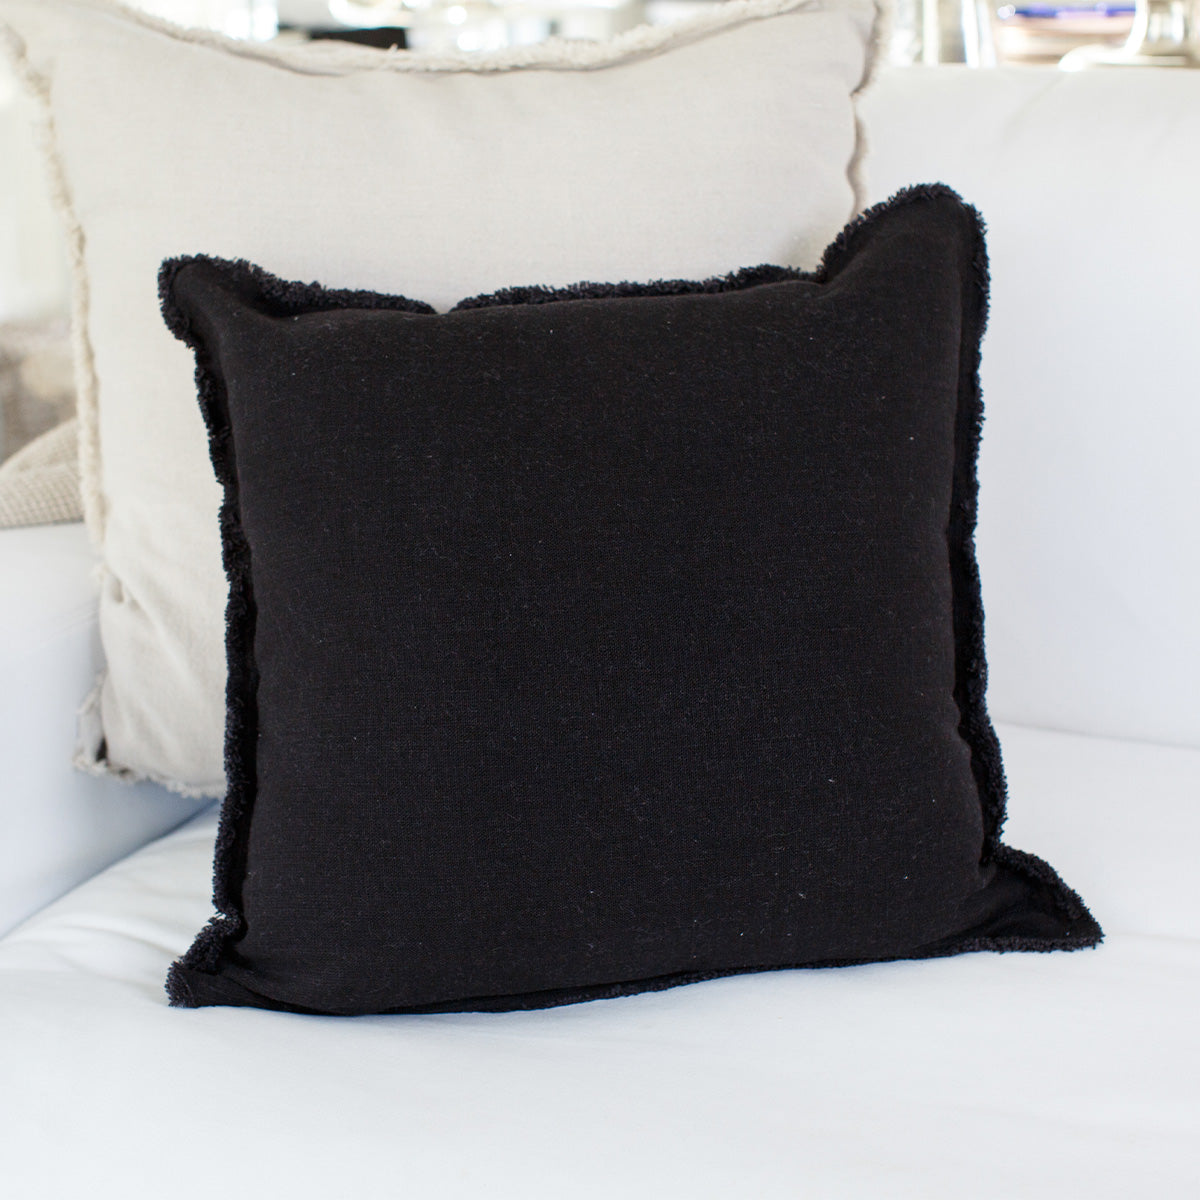 Provence Throw Pillow with Fringe